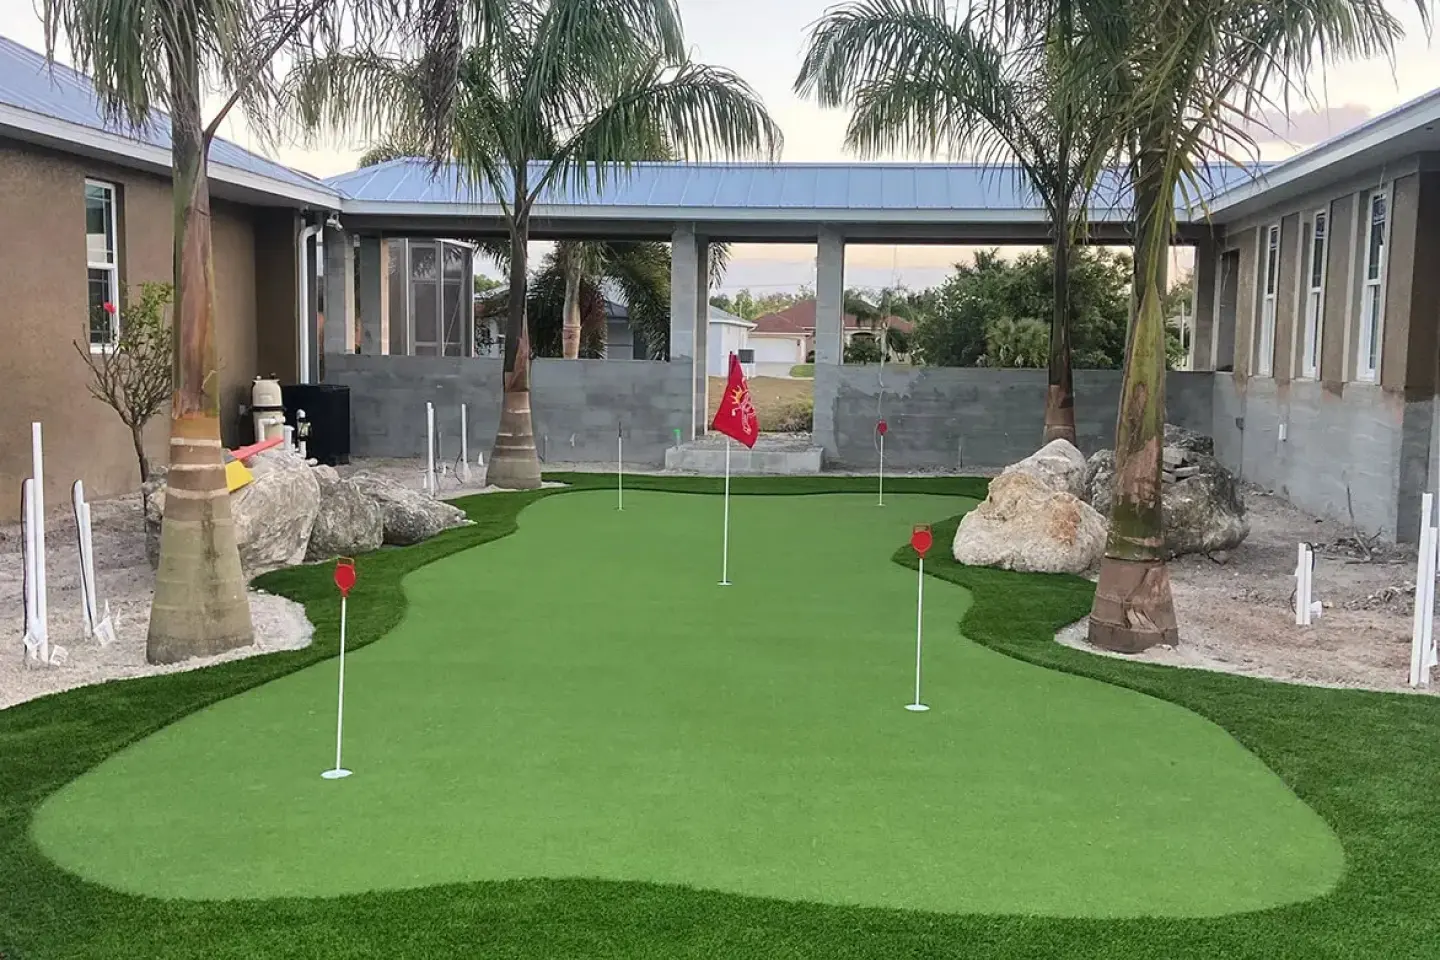 A backyard with palm trees and a putting green.